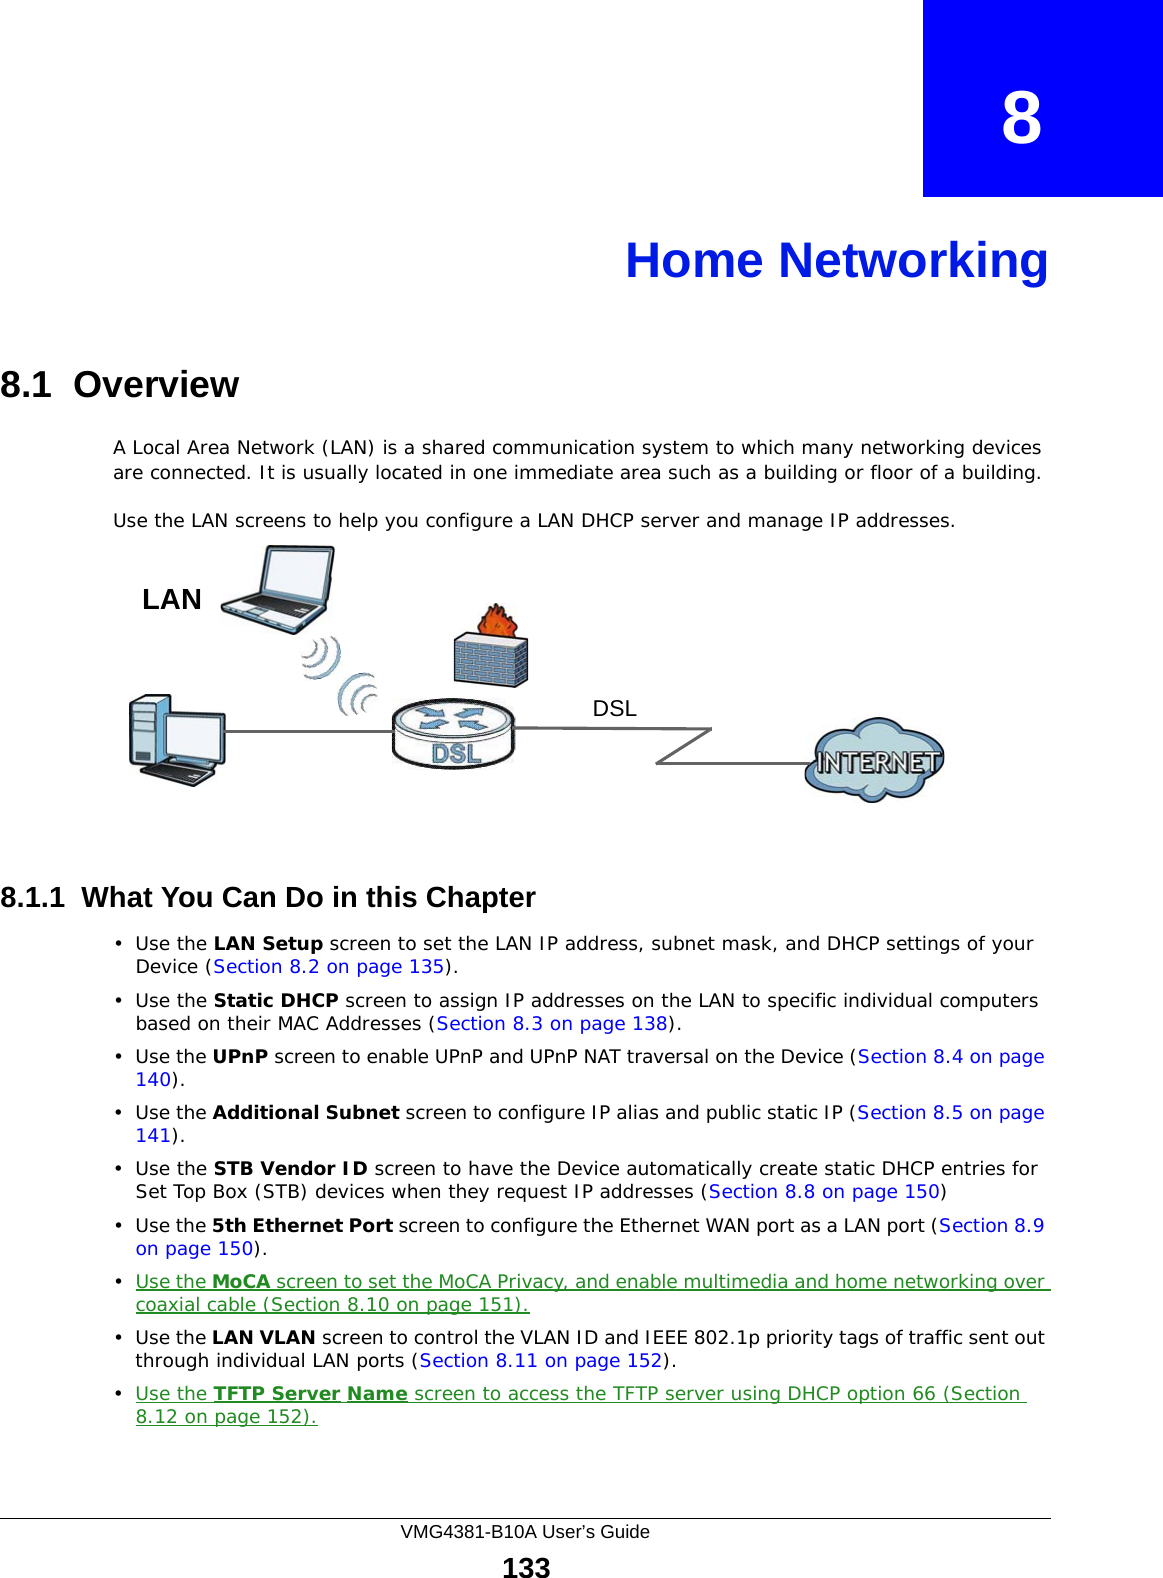 VMG4381-B10A User’s Guide133CHAPTER   8Home Networking8.1  OverviewA Local Area Network (LAN) is a shared communication system to which many networking devices are connected. It is usually located in one immediate area such as a building or floor of a building.Use the LAN screens to help you configure a LAN DHCP server and manage IP addresses.8.1.1  What You Can Do in this Chapter•Use the LAN Setup screen to set the LAN IP address, subnet mask, and DHCP settings of your Device (Section 8.2 on page 135).•Use the Static DHCP screen to assign IP addresses on the LAN to specific individual computers based on their MAC Addresses (Section 8.3 on page 138). •Use the UPnP screen to enable UPnP and UPnP NAT traversal on the Device (Section 8.4 on page 140).•Use the Additional Subnet screen to configure IP alias and public static IP (Section 8.5 on page 141).•Use the STB Vendor ID screen to have the Device automatically create static DHCP entries for Set Top Box (STB) devices when they request IP addresses (Section 8.8 on page 150)•Use the 5th Ethernet Port screen to configure the Ethernet WAN port as a LAN port (Section 8.9 on page 150).•Use the MoCA screen to set the MoCA Privacy, and enable multimedia and home networking over coaxial cable (Section 8.10 on page 151).•Use the LAN VLAN screen to control the VLAN ID and IEEE 802.1p priority tags of traffic sent out through individual LAN ports (Section 8.11 on page 152).•Use the TFTP Server Name screen to access the TFTP server using DHCP option 66 (Section 8.12 on page 152).DSLLAN